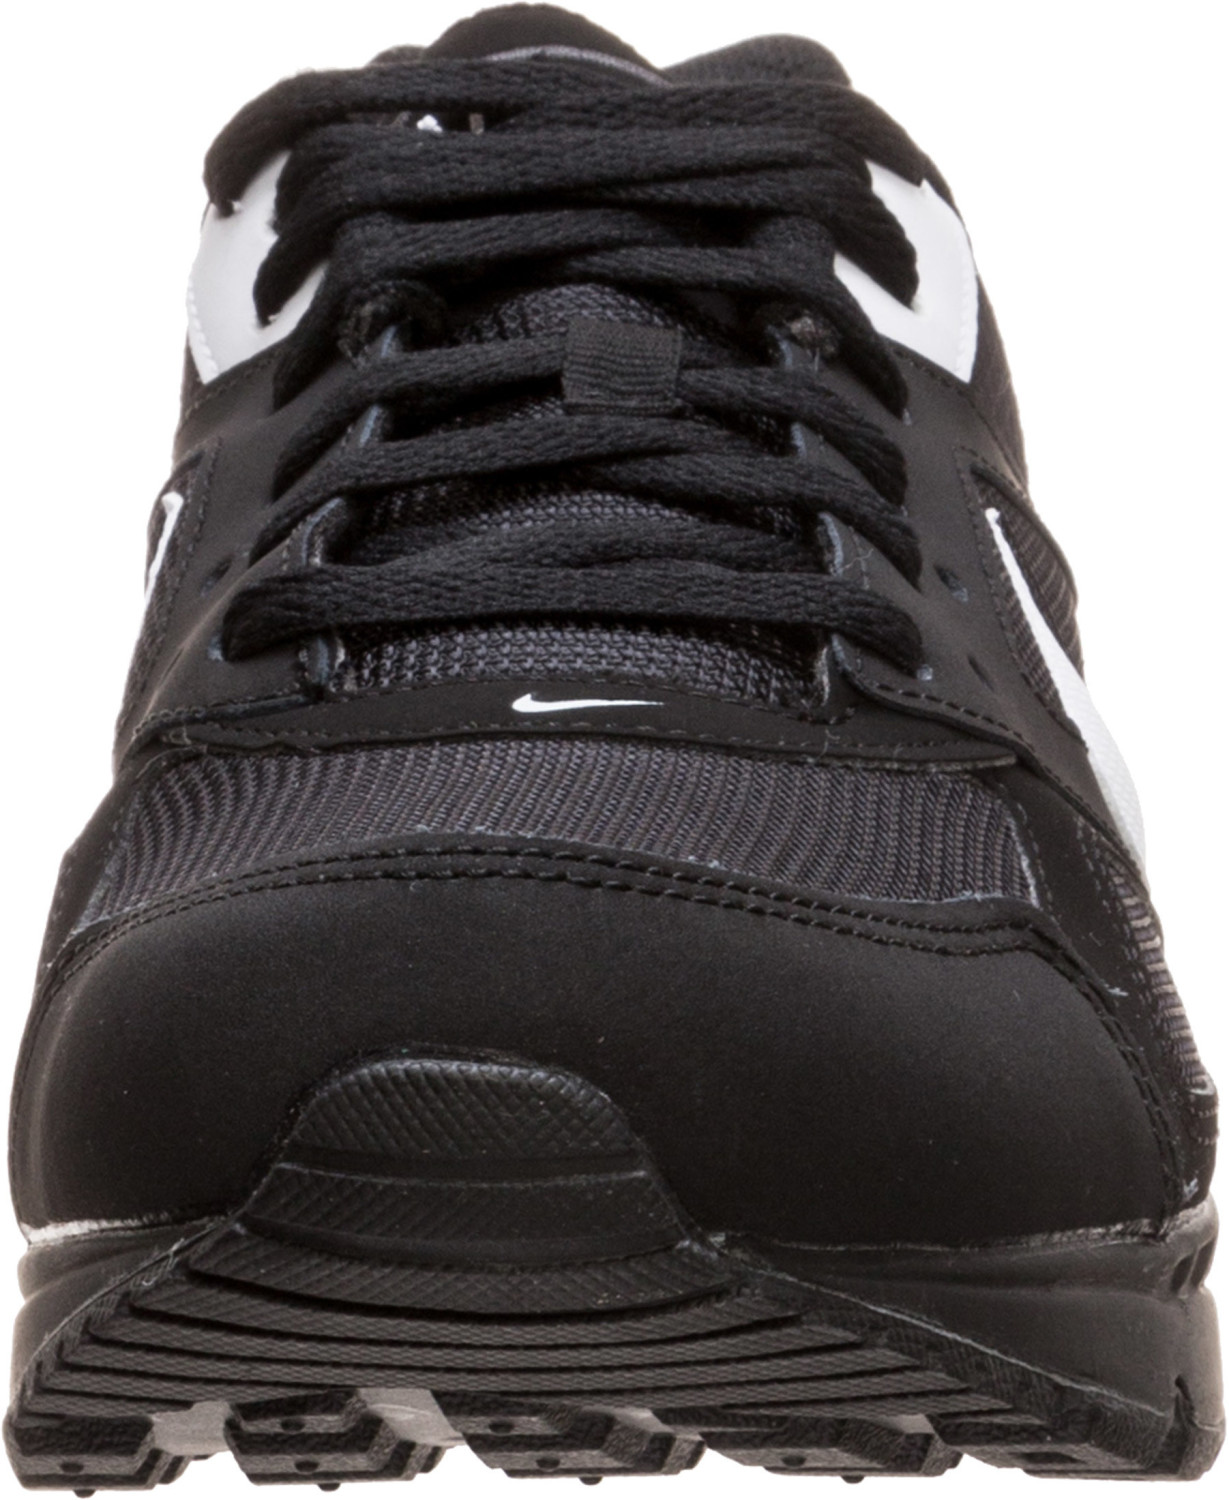 Buy Nike Air Max Ivo black/white from £90.00 (Today) – Best Deals on ...